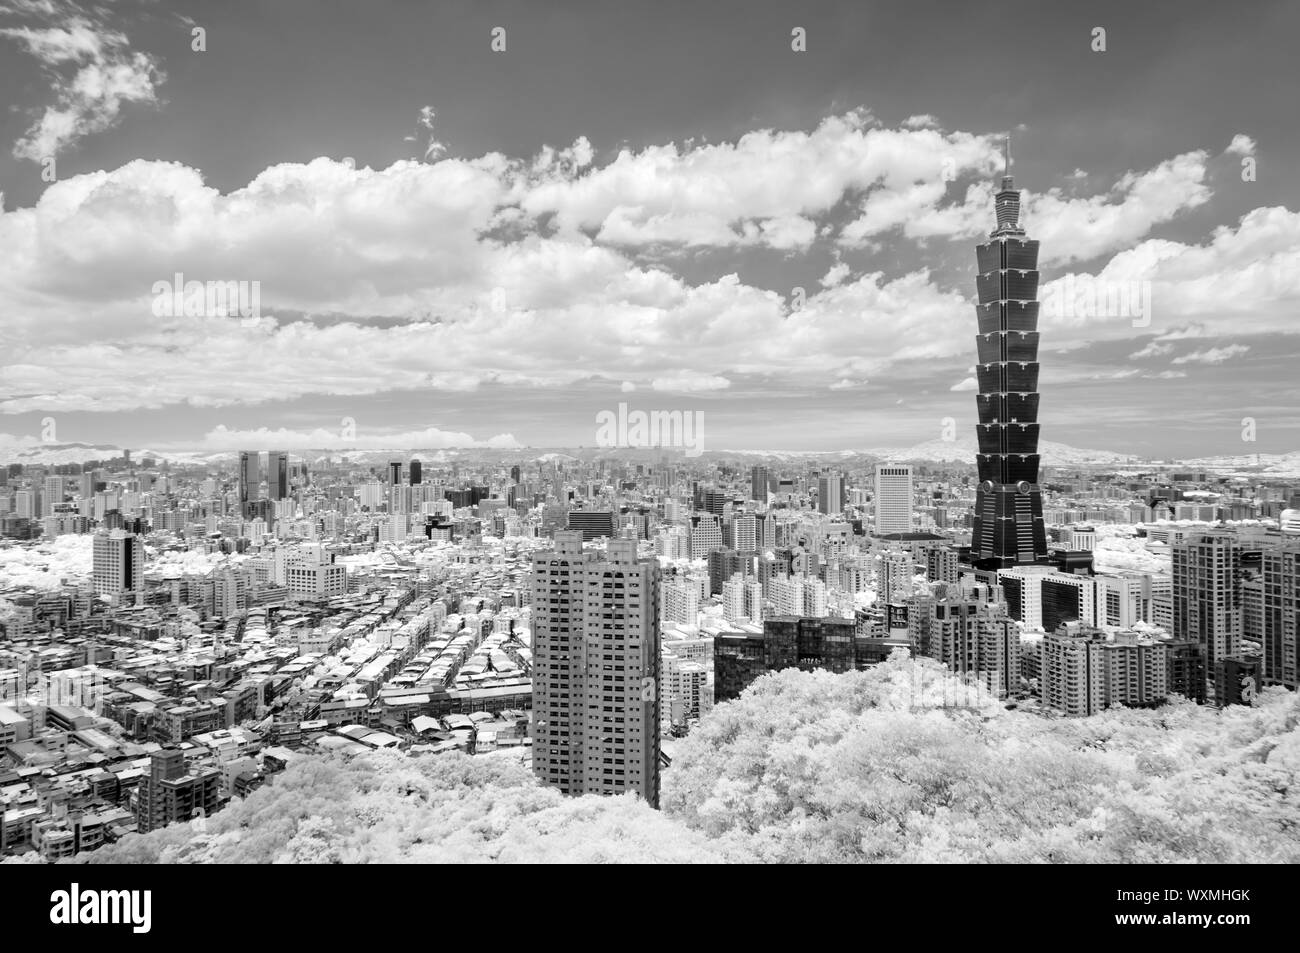 Taipei cityscape with dramatic clouds at sky, infrared photography in black and white. Stock Photo